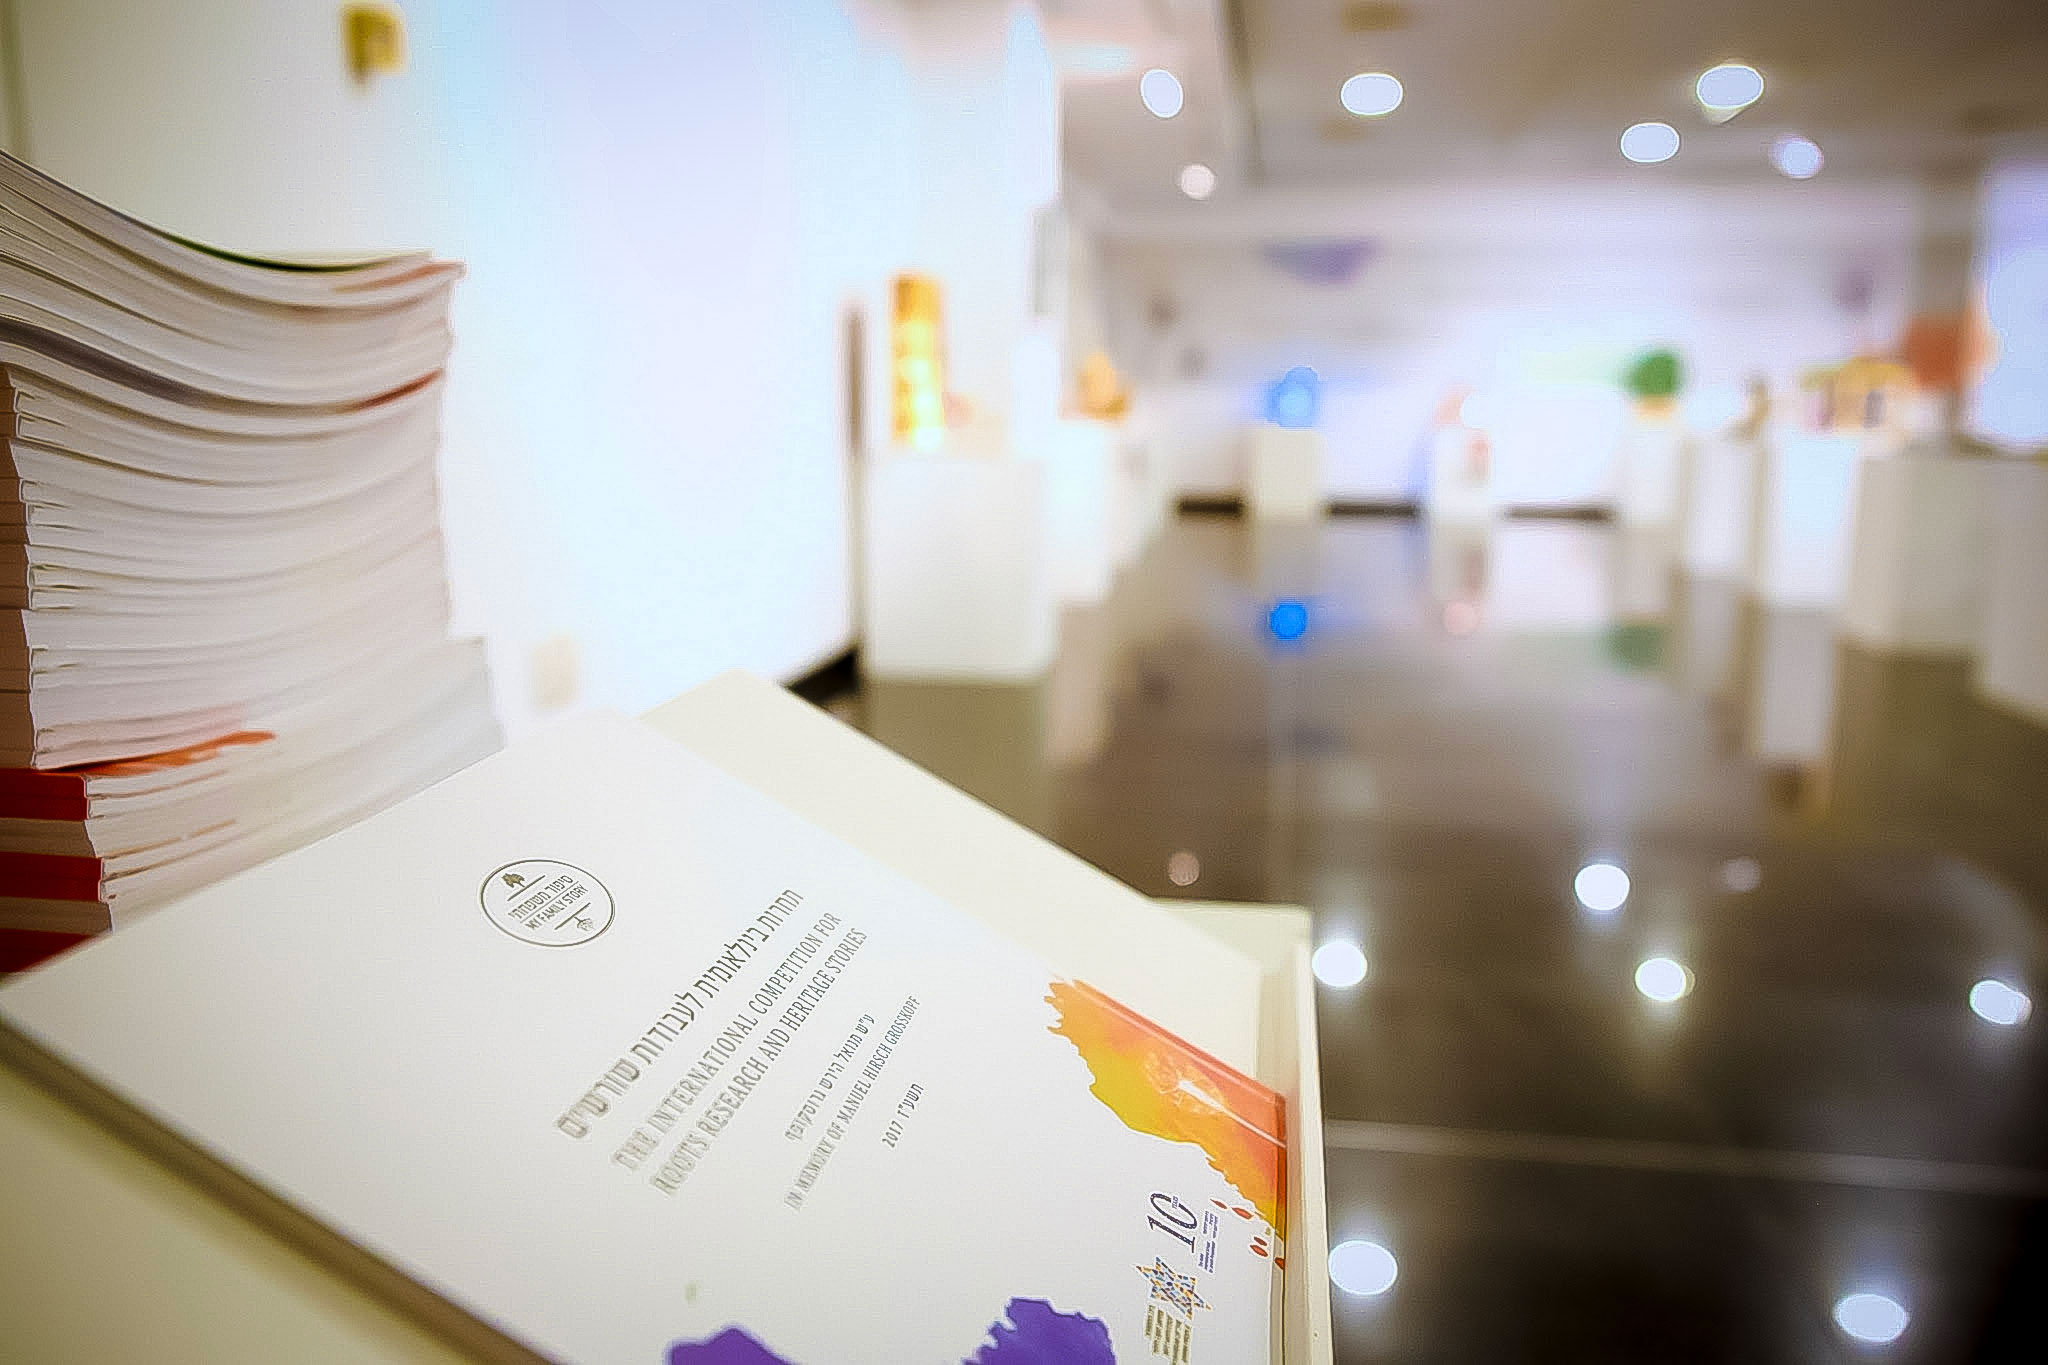 The exhibition book at the International Competition for Roots Research and Heritage Studies, at The Museum of the Jewish People at Beit Hatfutsot in Tel Aviv, Israel.